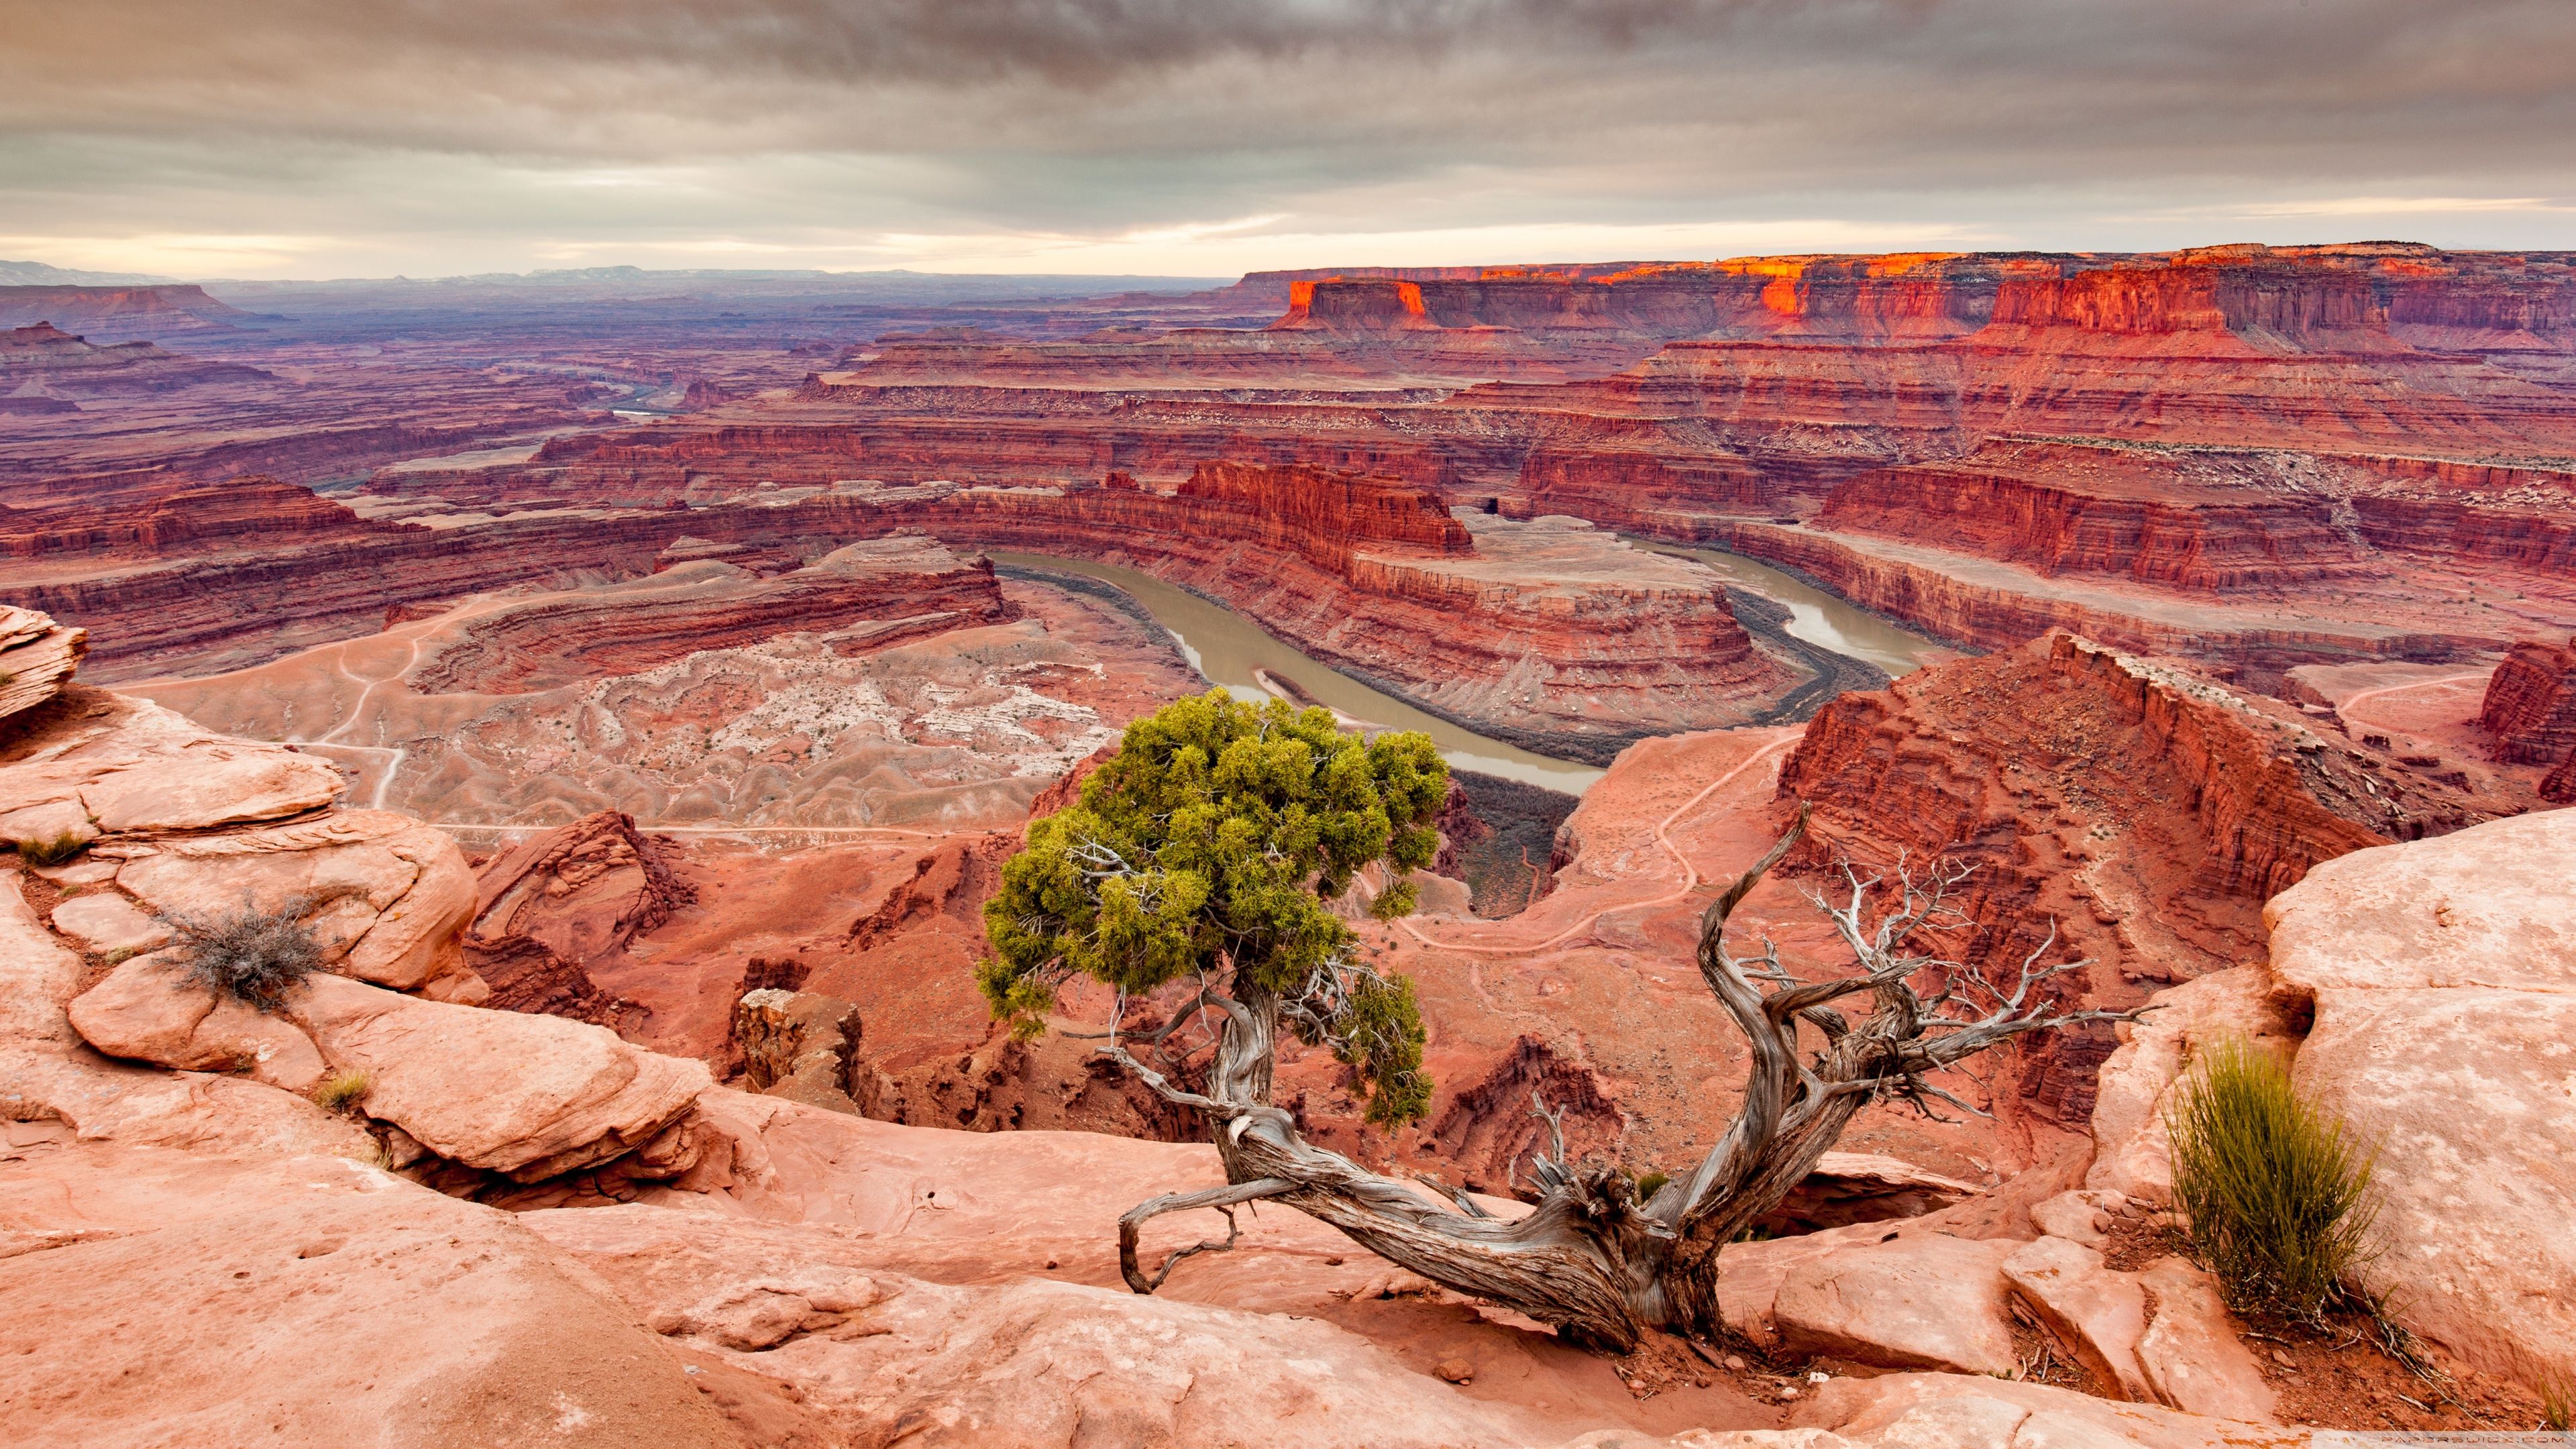 View of the Colorado River and Canyonlands National Park from Dead Horse Point Ultra HD Desktop Background Wallpaper for 4K UHD TV, Widescreen & UltraWide Desktop & Laptop, Tablet